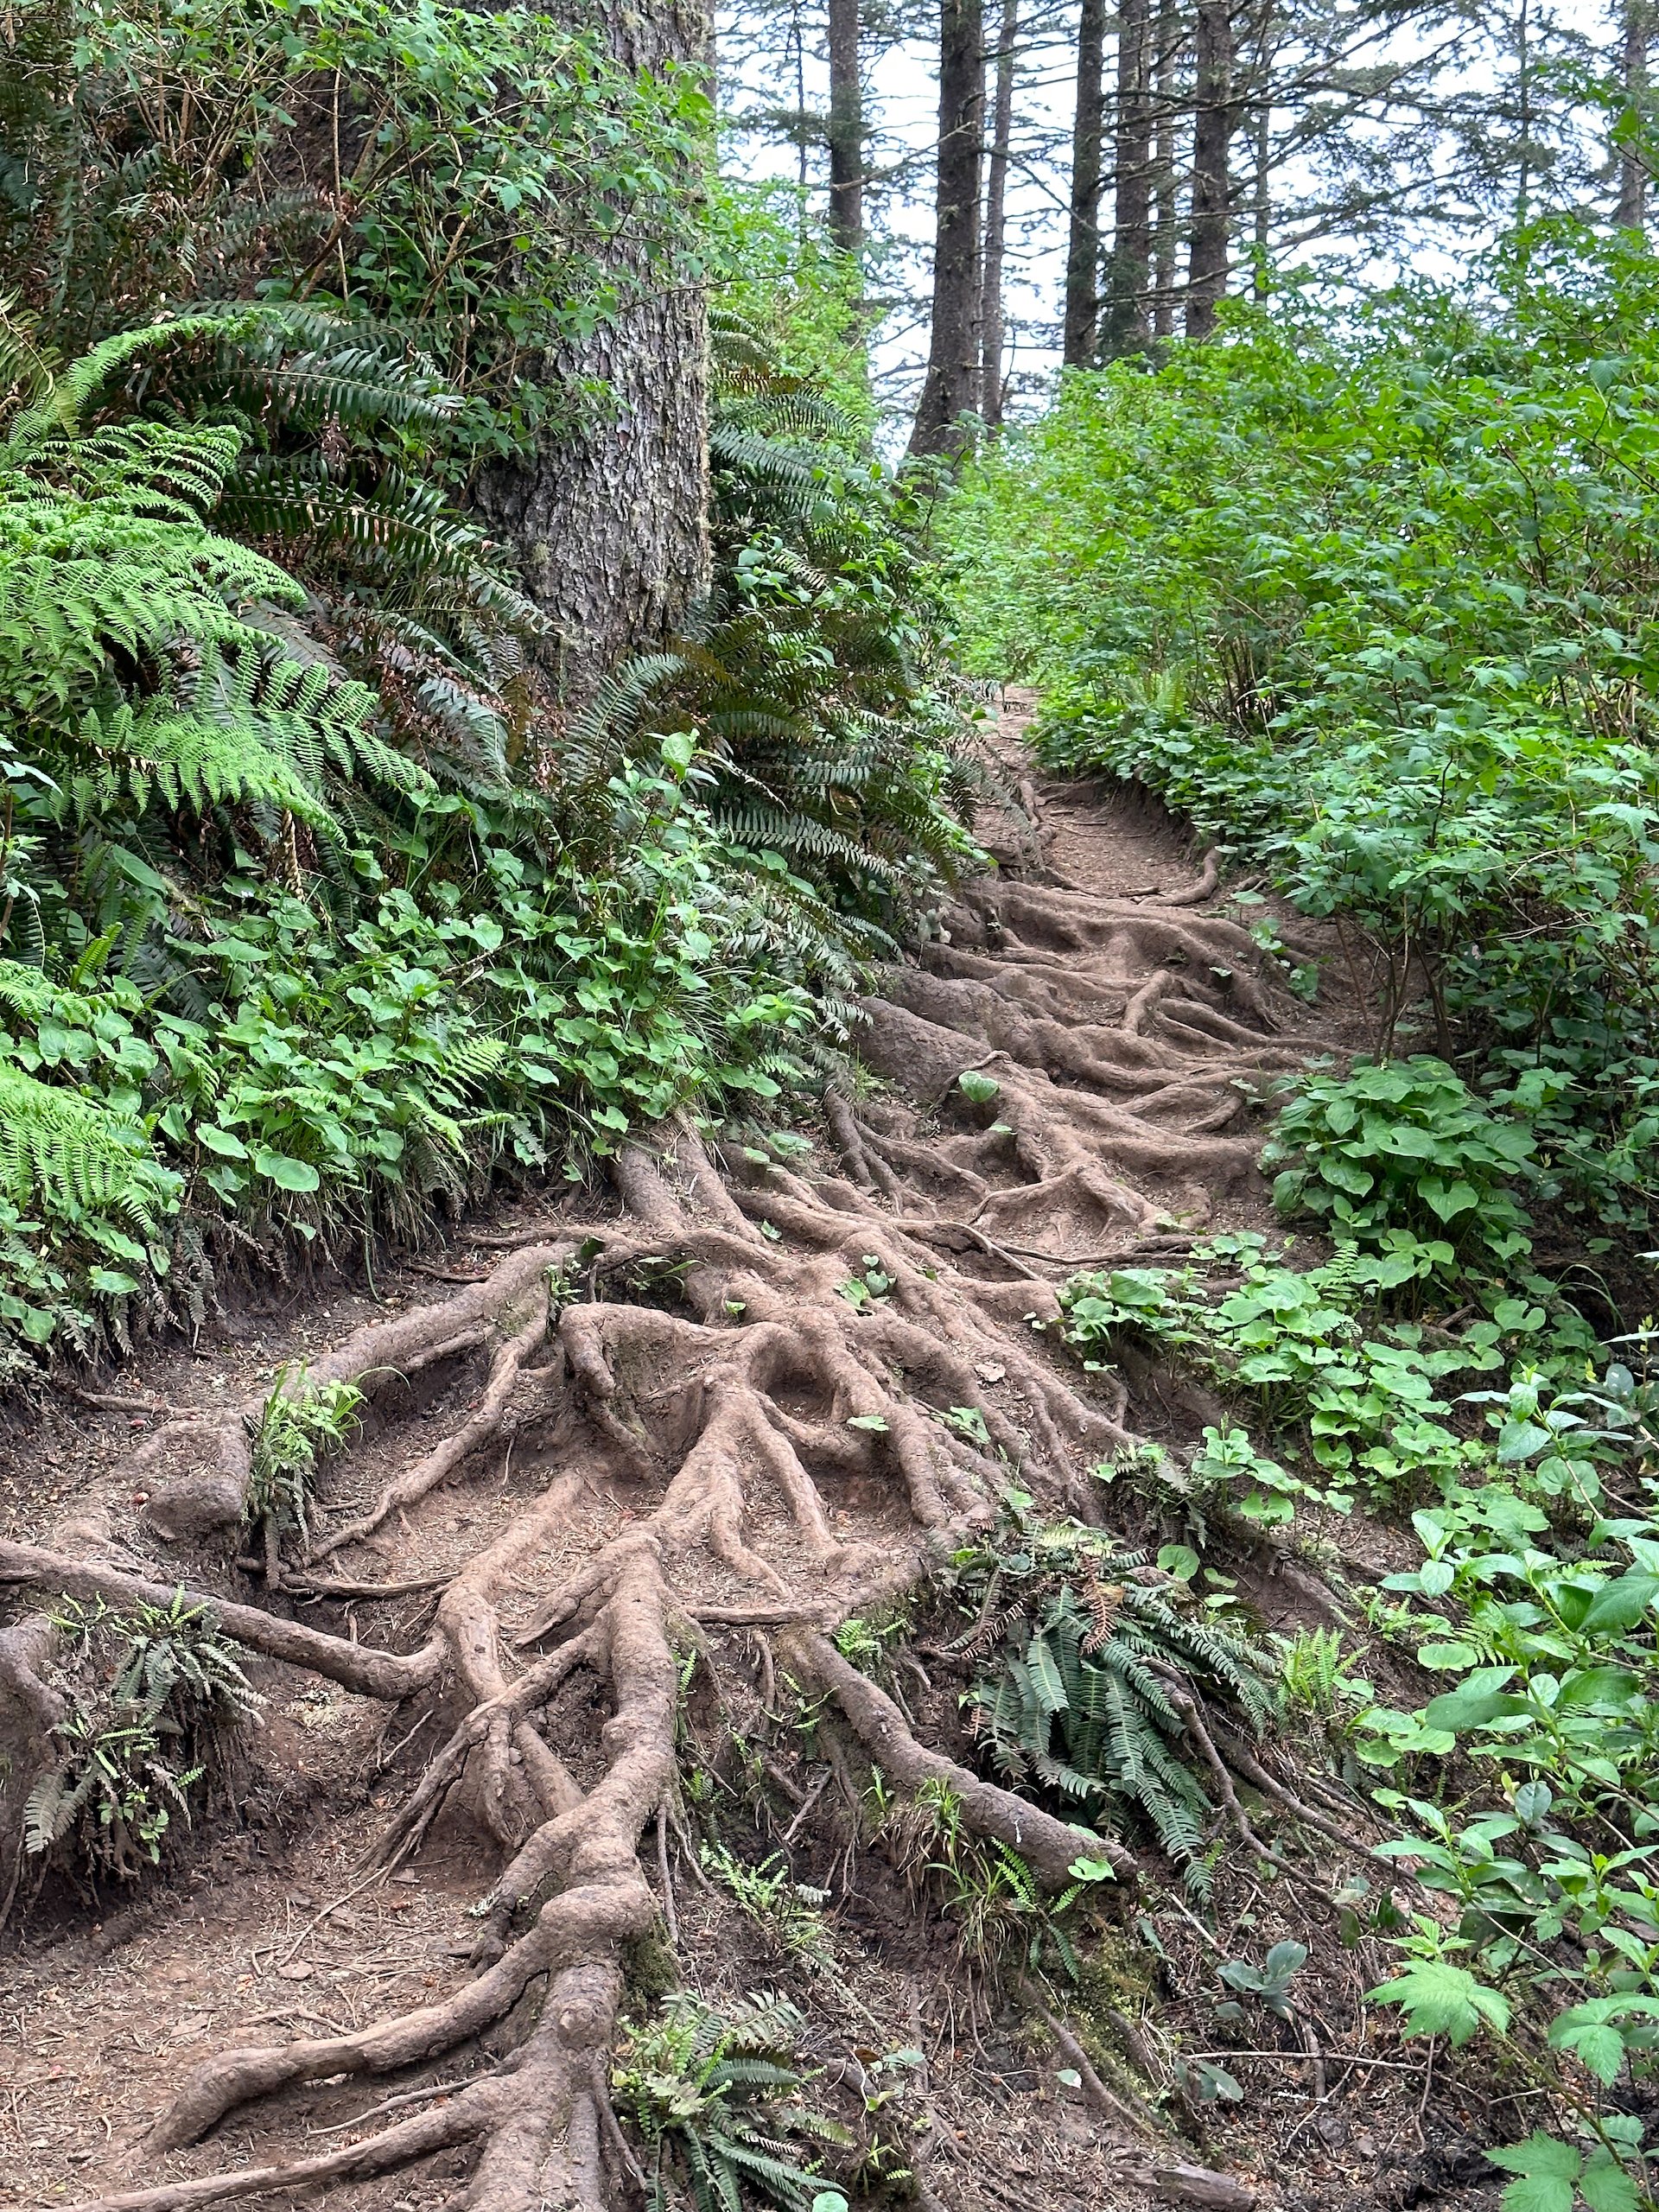  In many places the trail was slightly difficult, with lots of roots and mud to be navigated.  